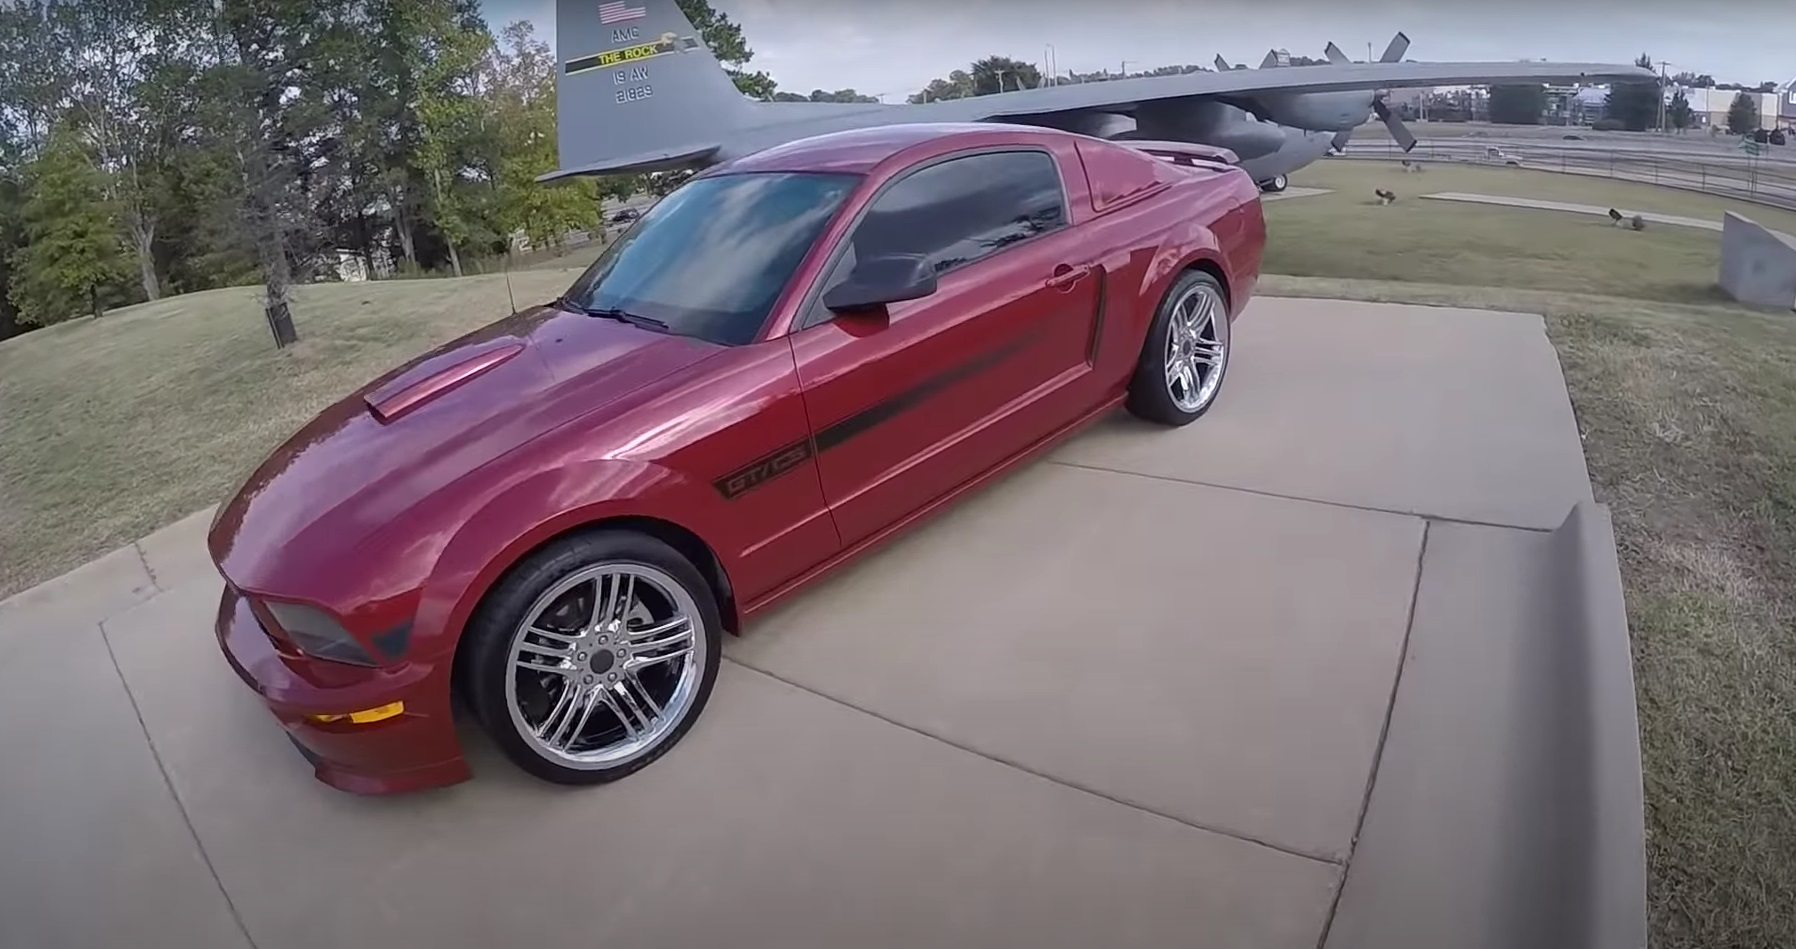 Video: 2008 Ford Mustang GT/CS California Special Test Drive